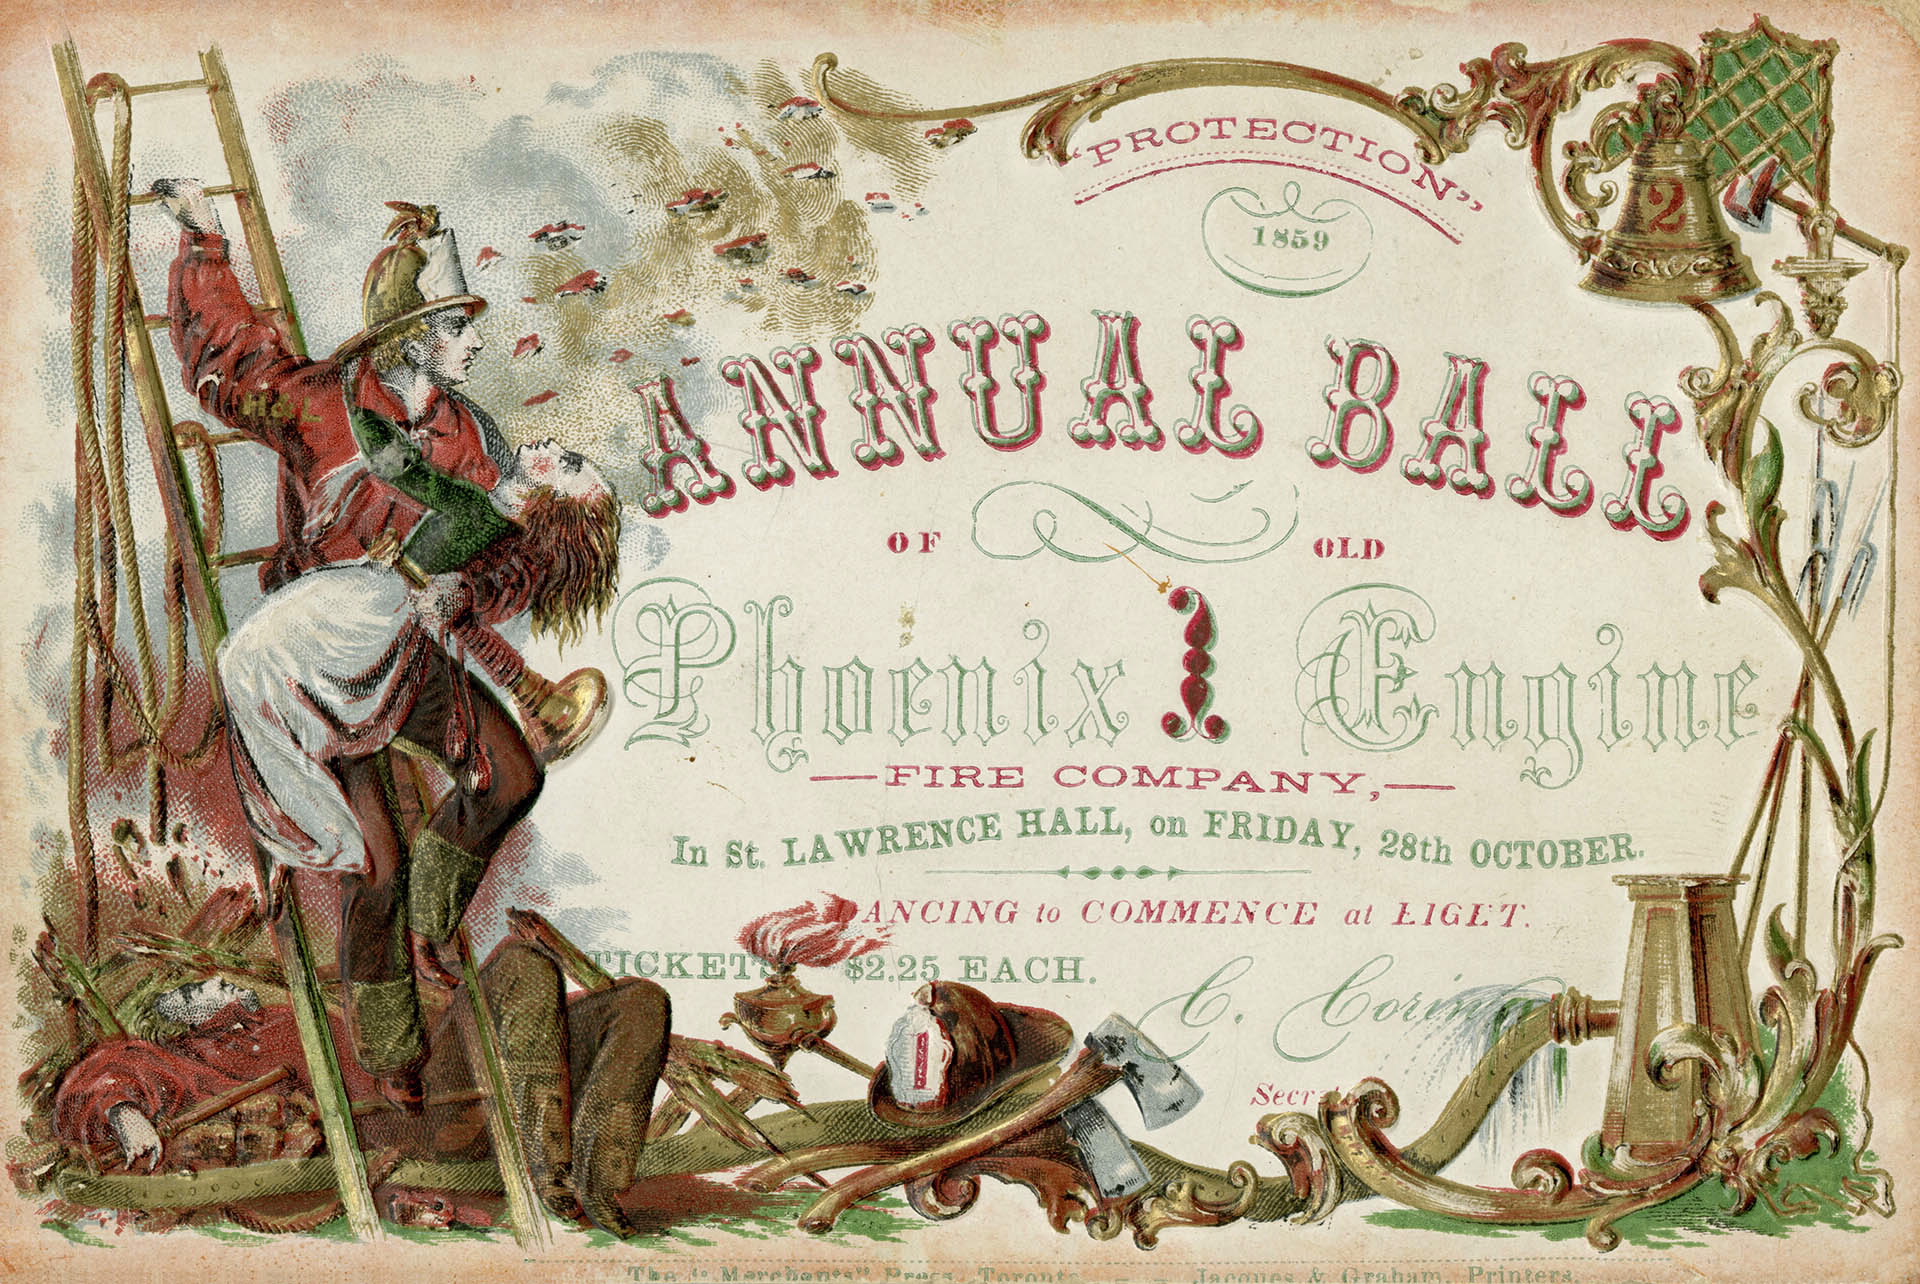 Invitation the Firemen's Ball at the Hall